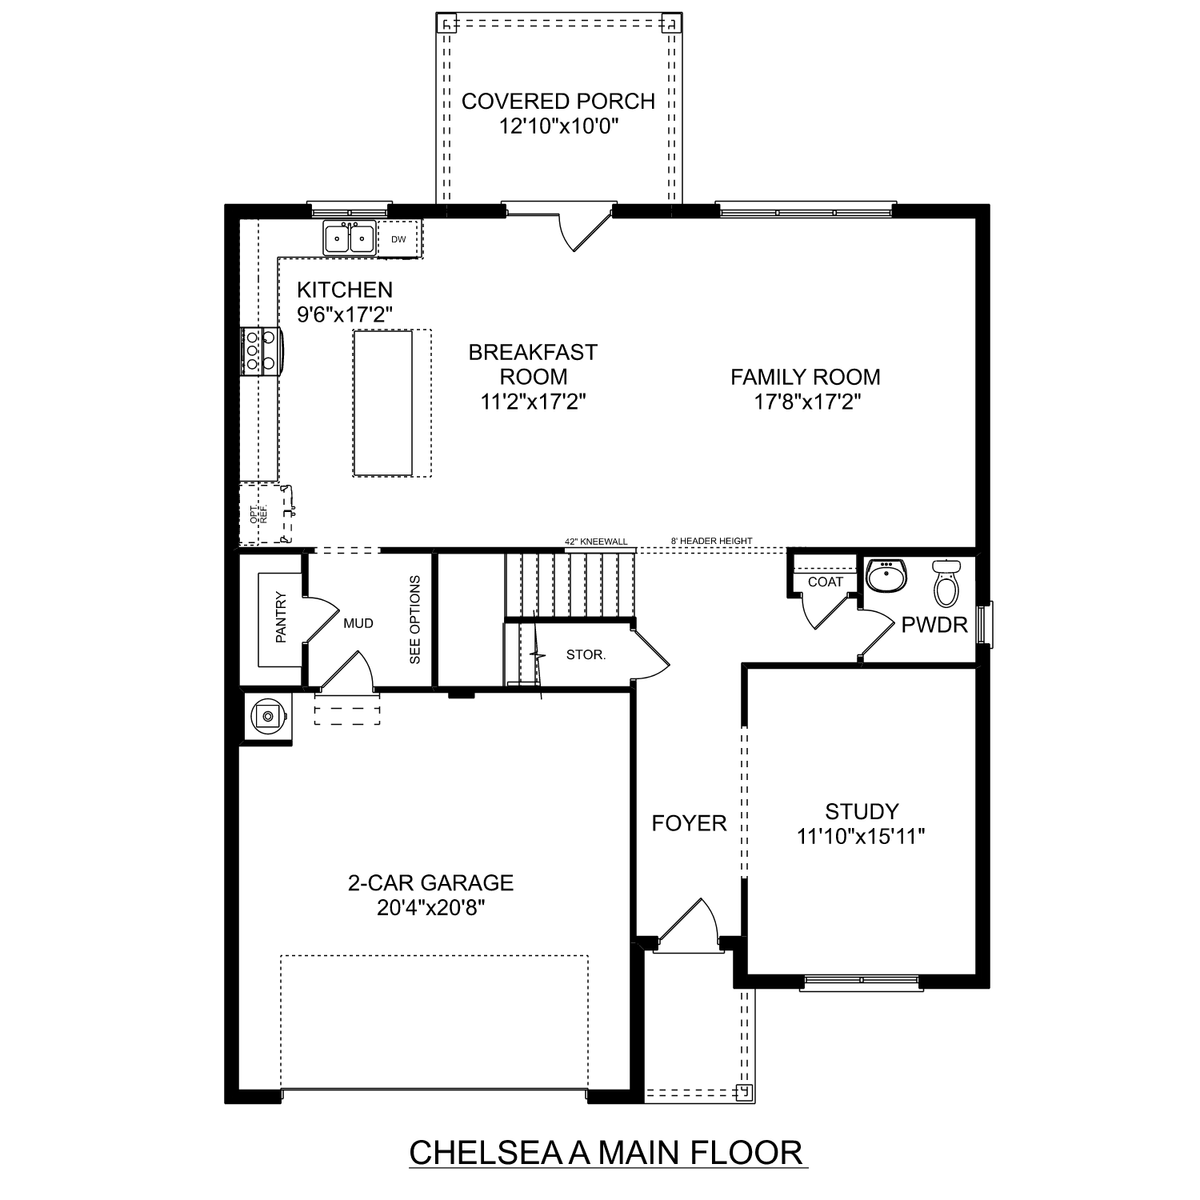 1 - The Chelsea A buildable floor plan layout in Davidson Homes' Flint Meadows community.